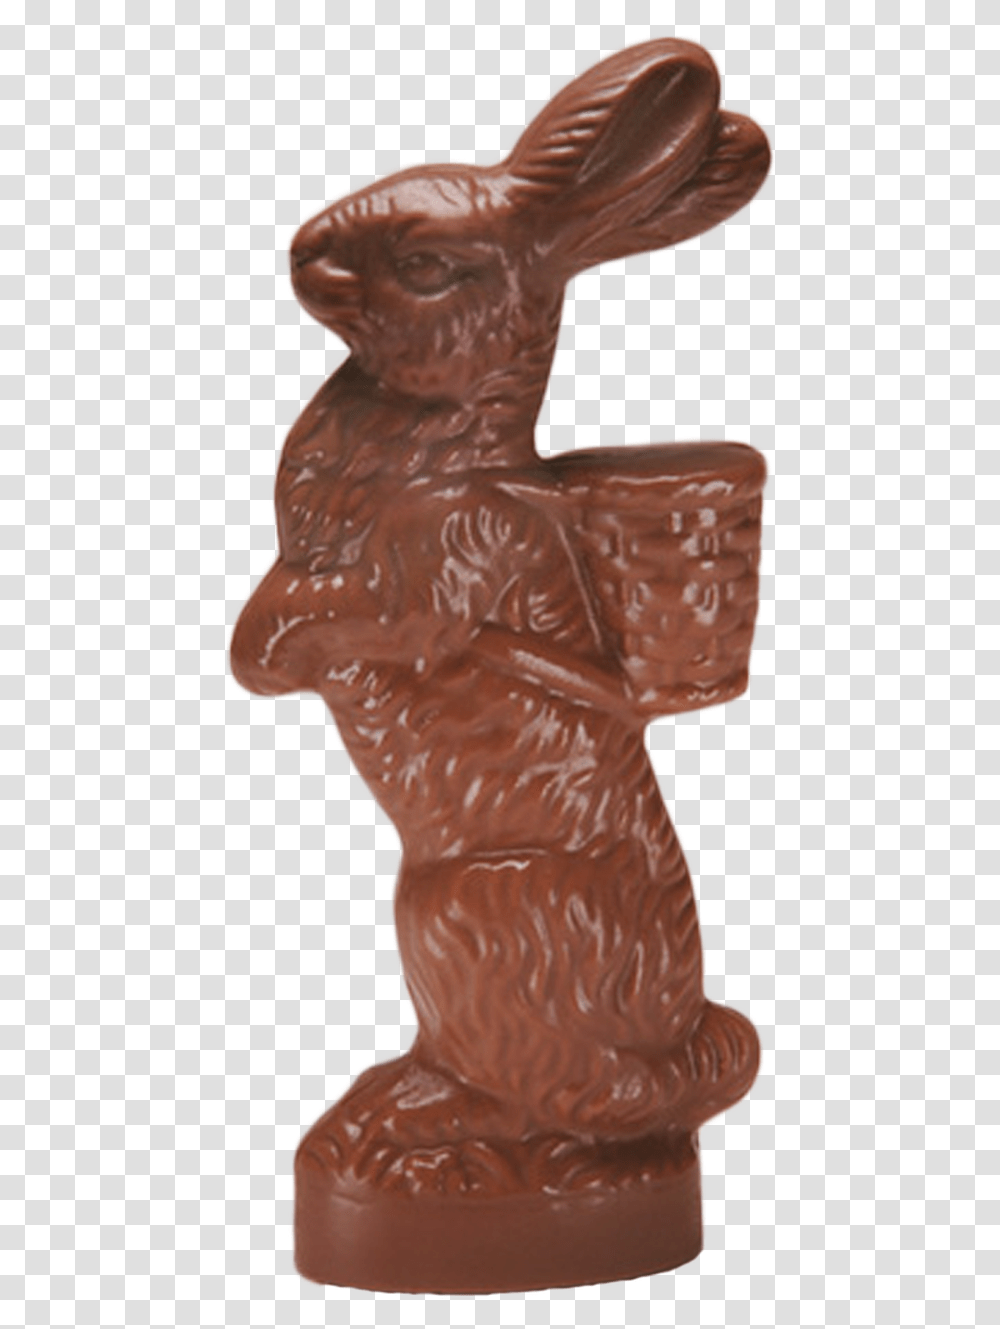 Chocolate Squirrel Made In Milk Chocolate Amp Orange, Sweets, Food, Confectionery, Dessert Transparent Png